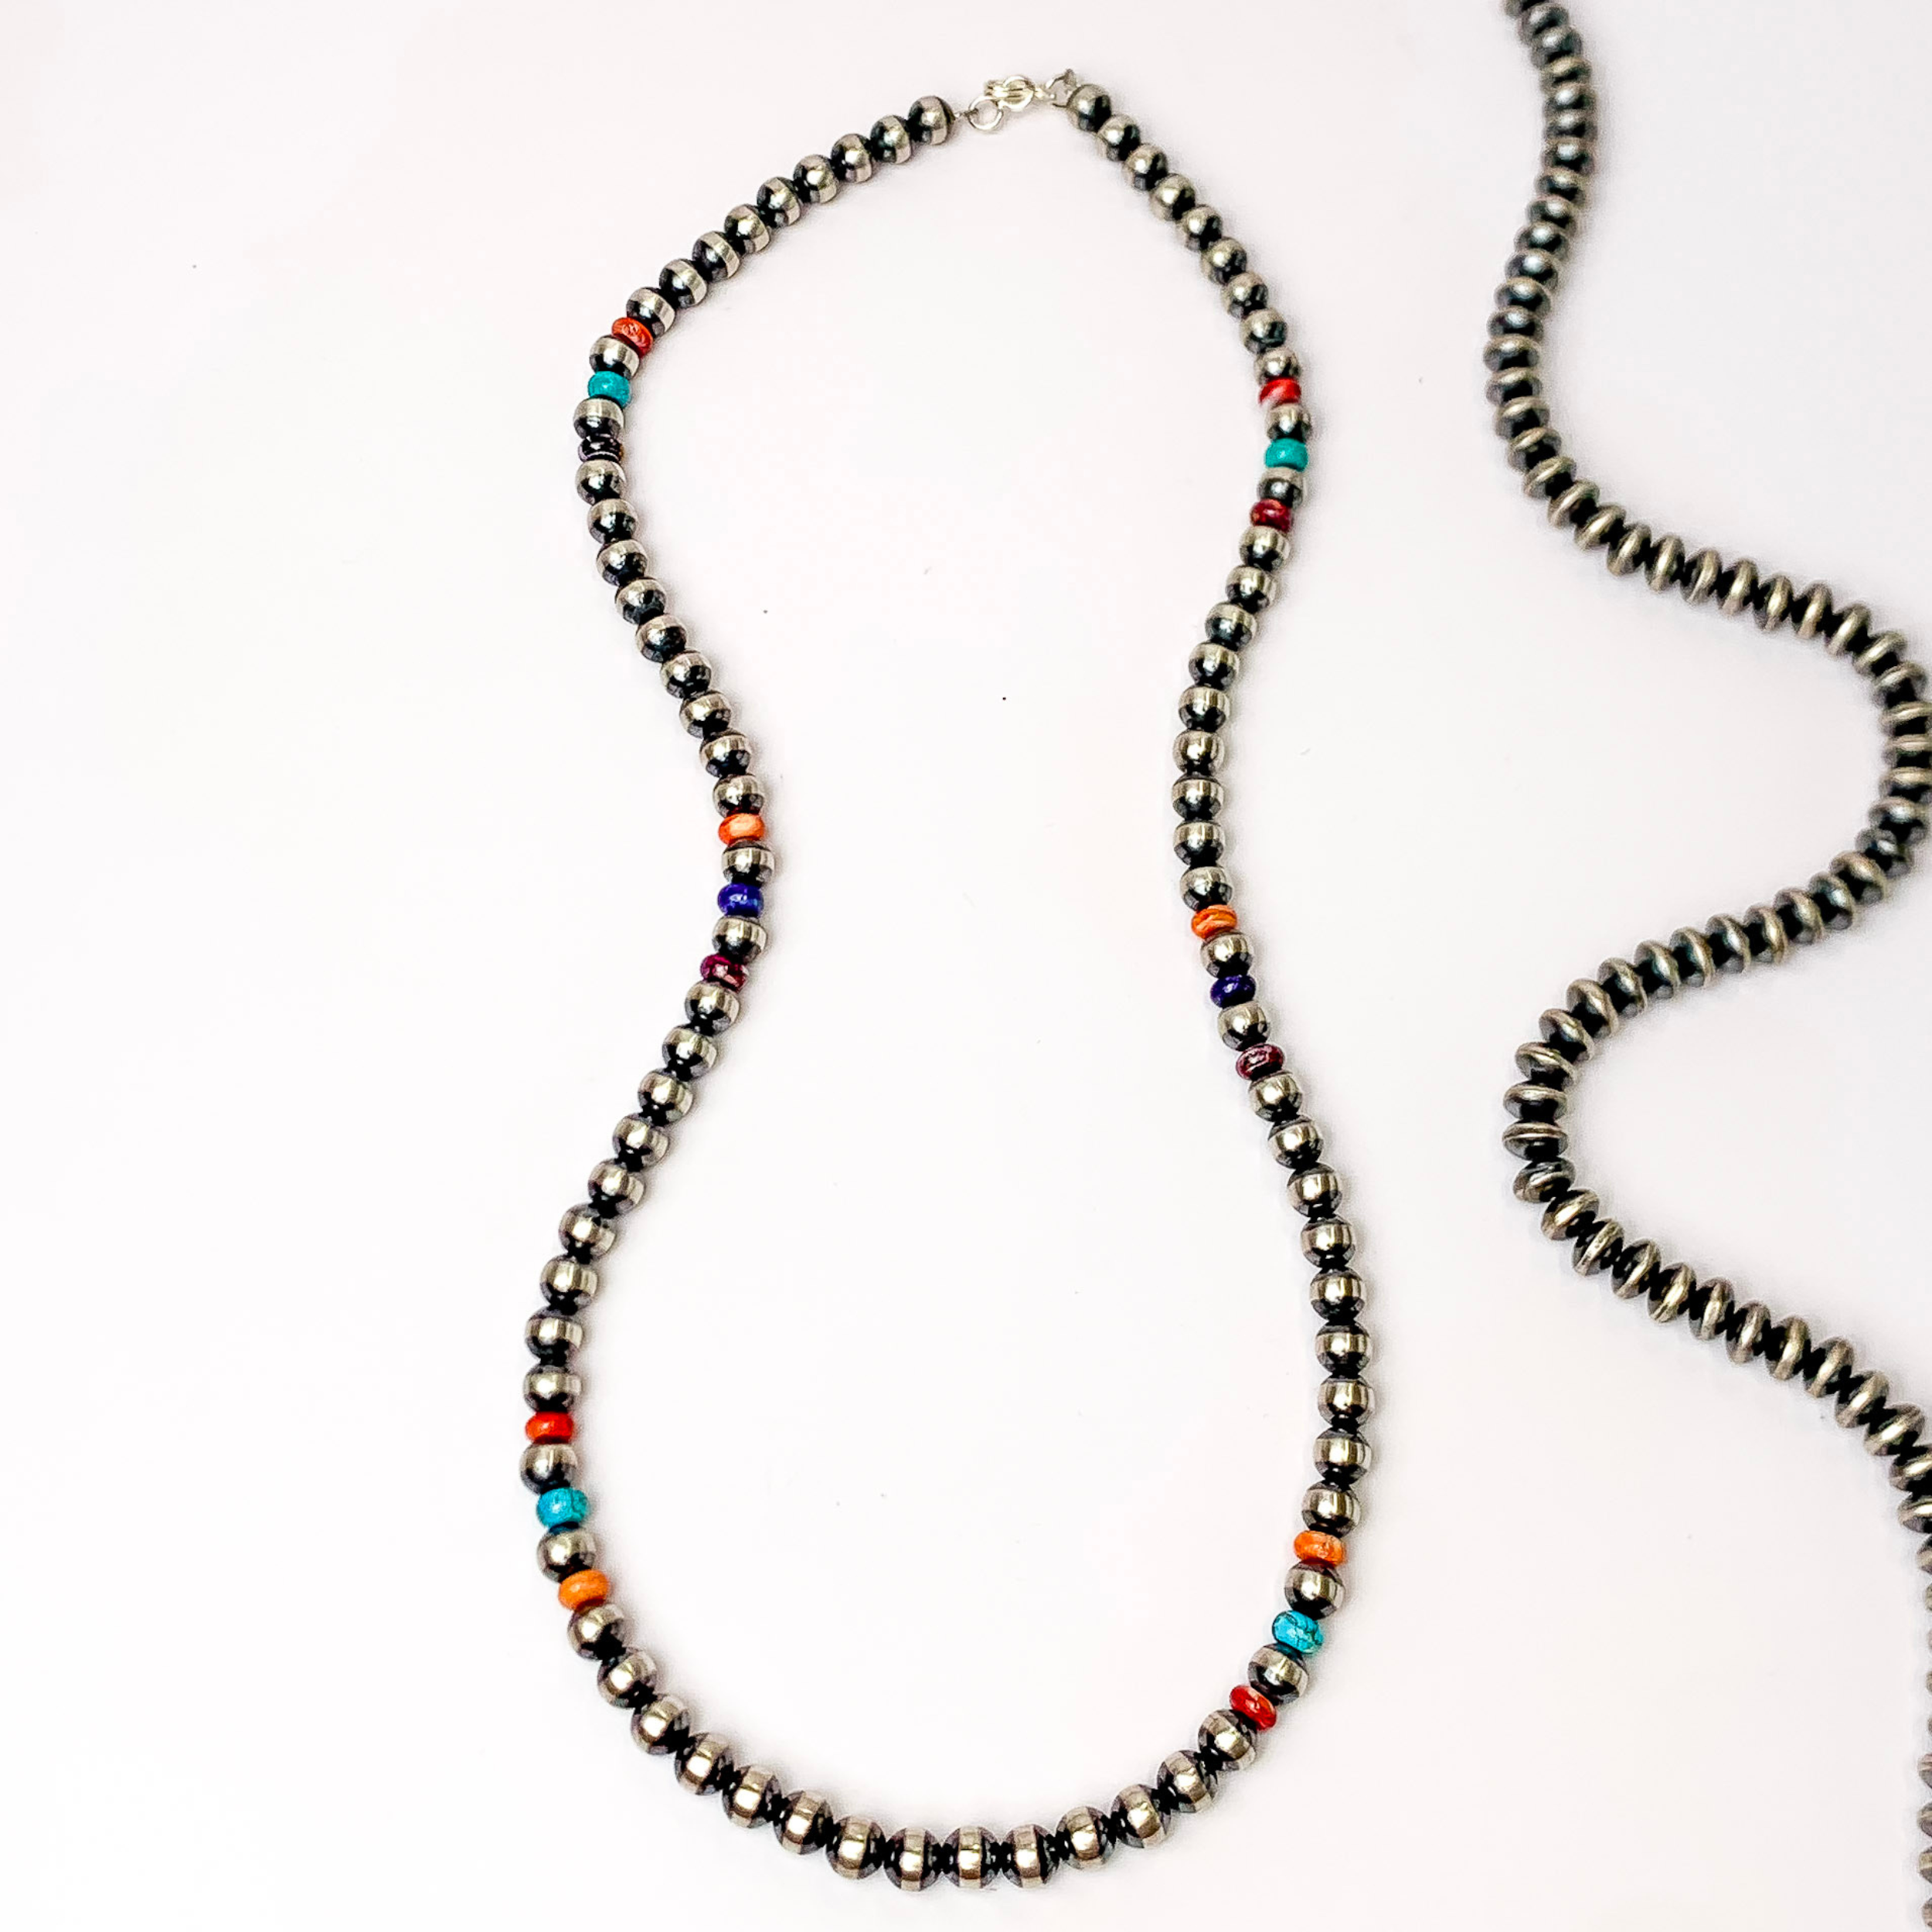 Centered in the picture is a Navajo beaded necklace with purple, orange, red, and blue beads in between.